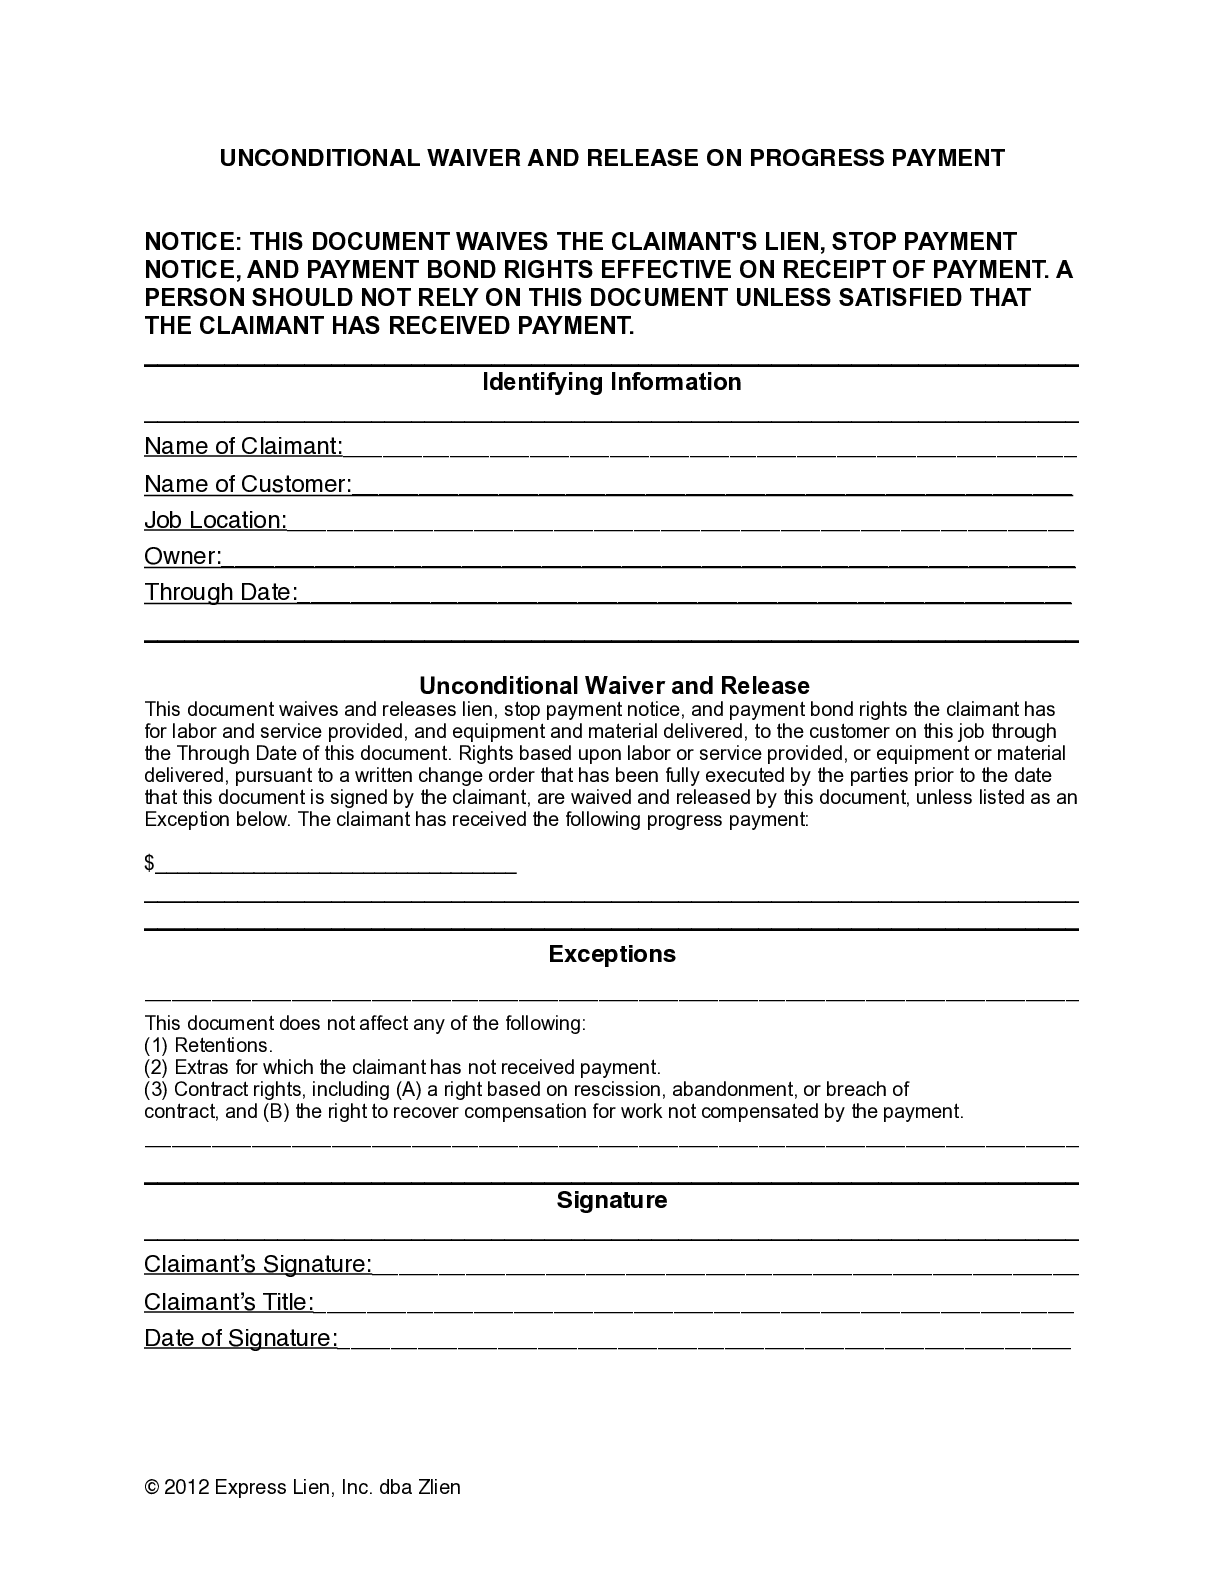 Connecticut Partial Unconditional Lien Waiver Form - free from